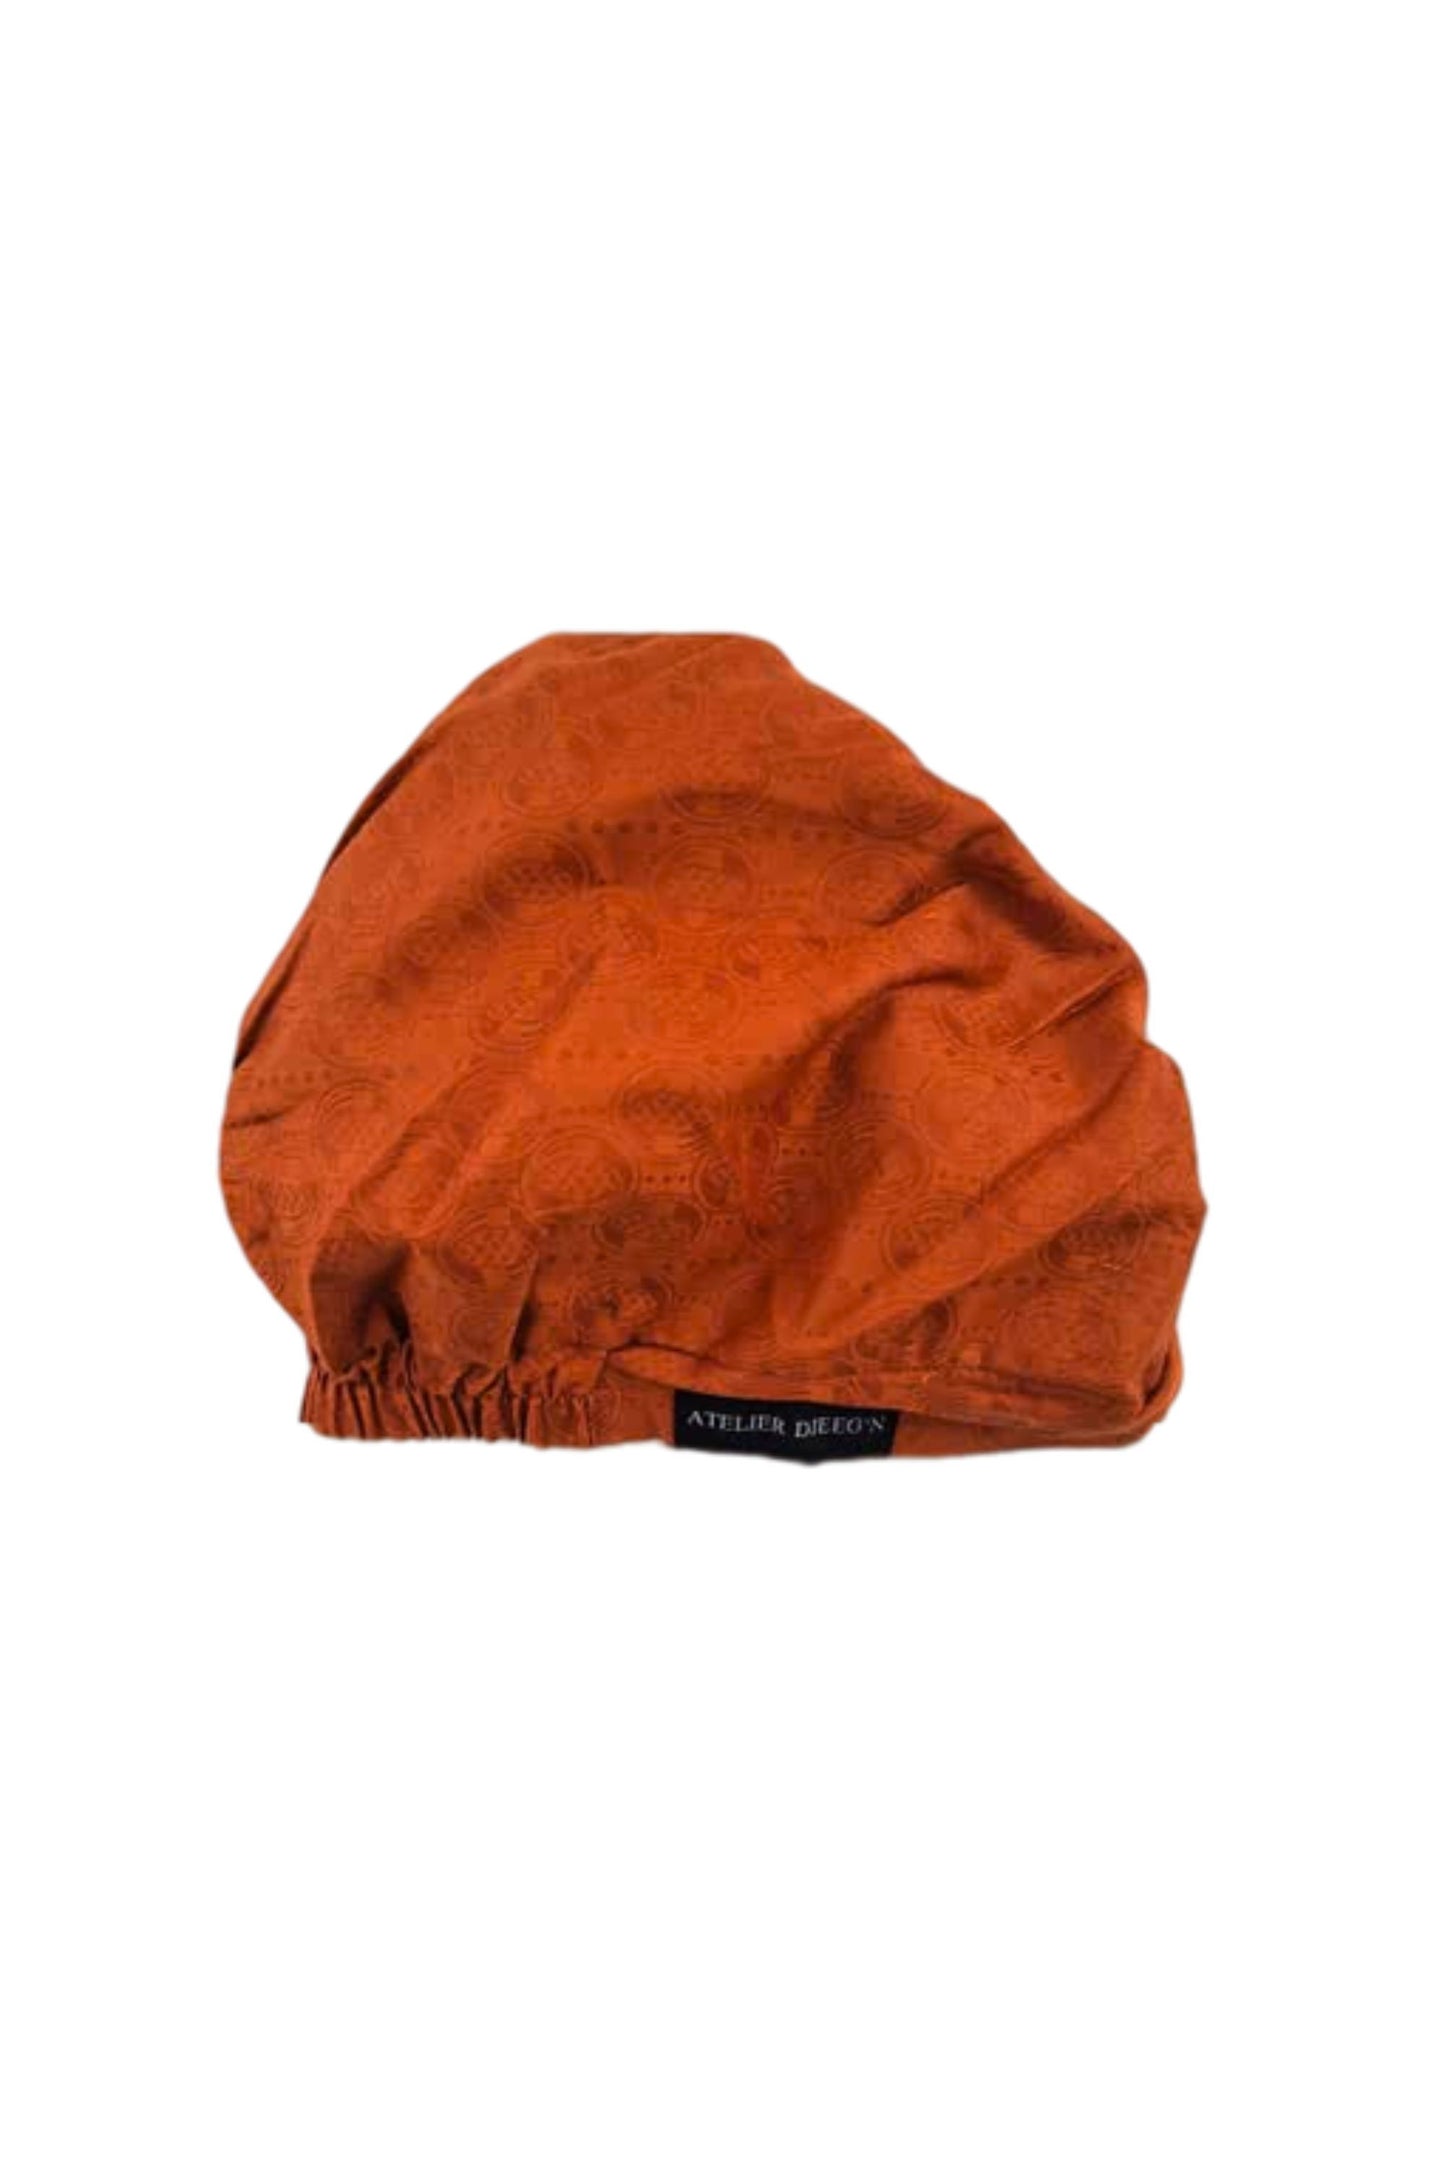 Satin Lined Beanie in Caramel Brown Damask Fabric